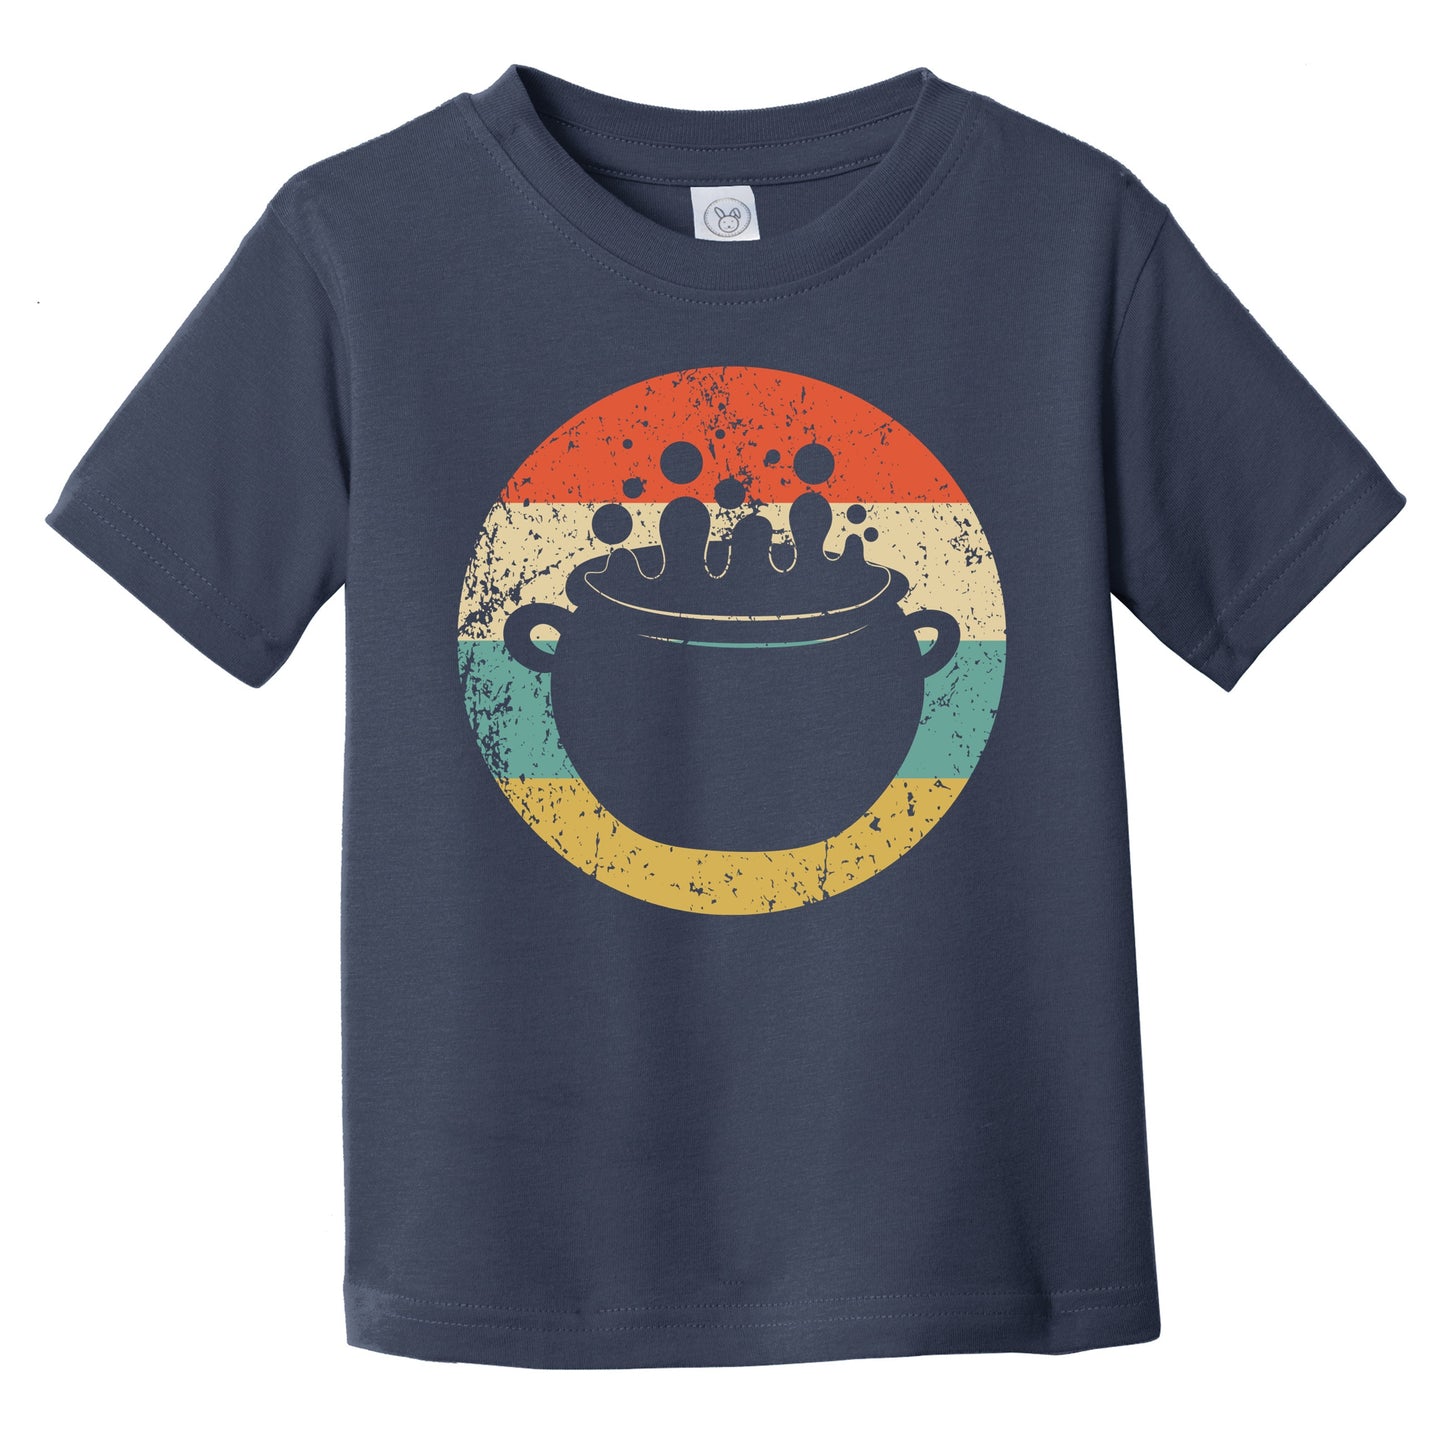 Retro Spooky Scary Witches Cauldron Silhouette Halloween Infant Toddler T-Shirt